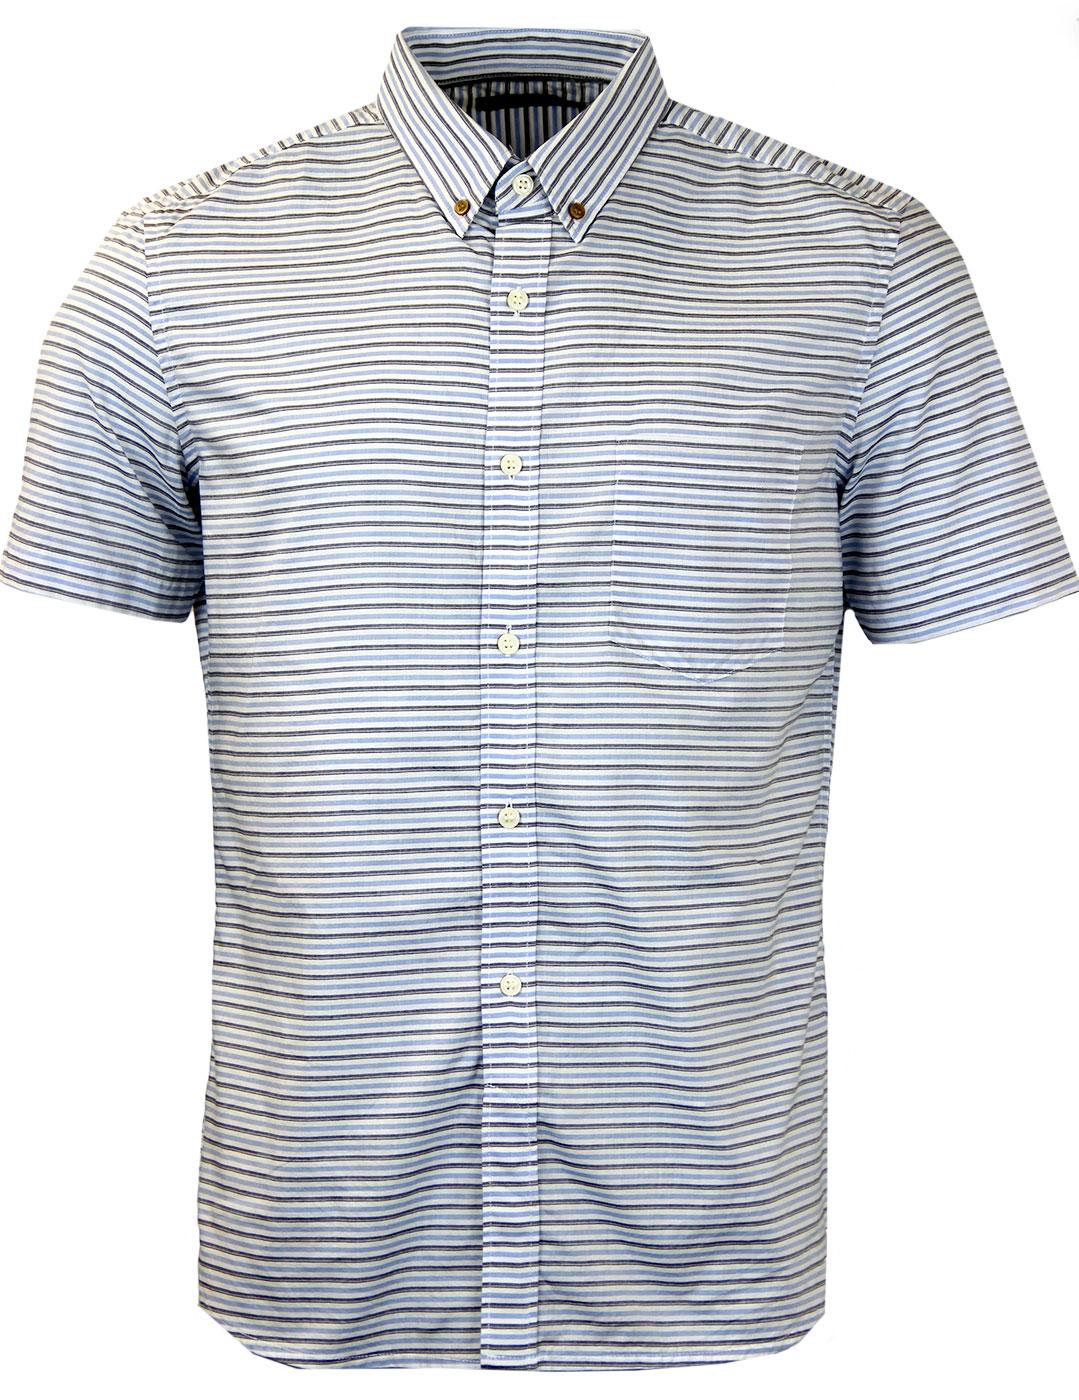 Boilly FRENCH CONNECTION Horizontal Stripe Shirt